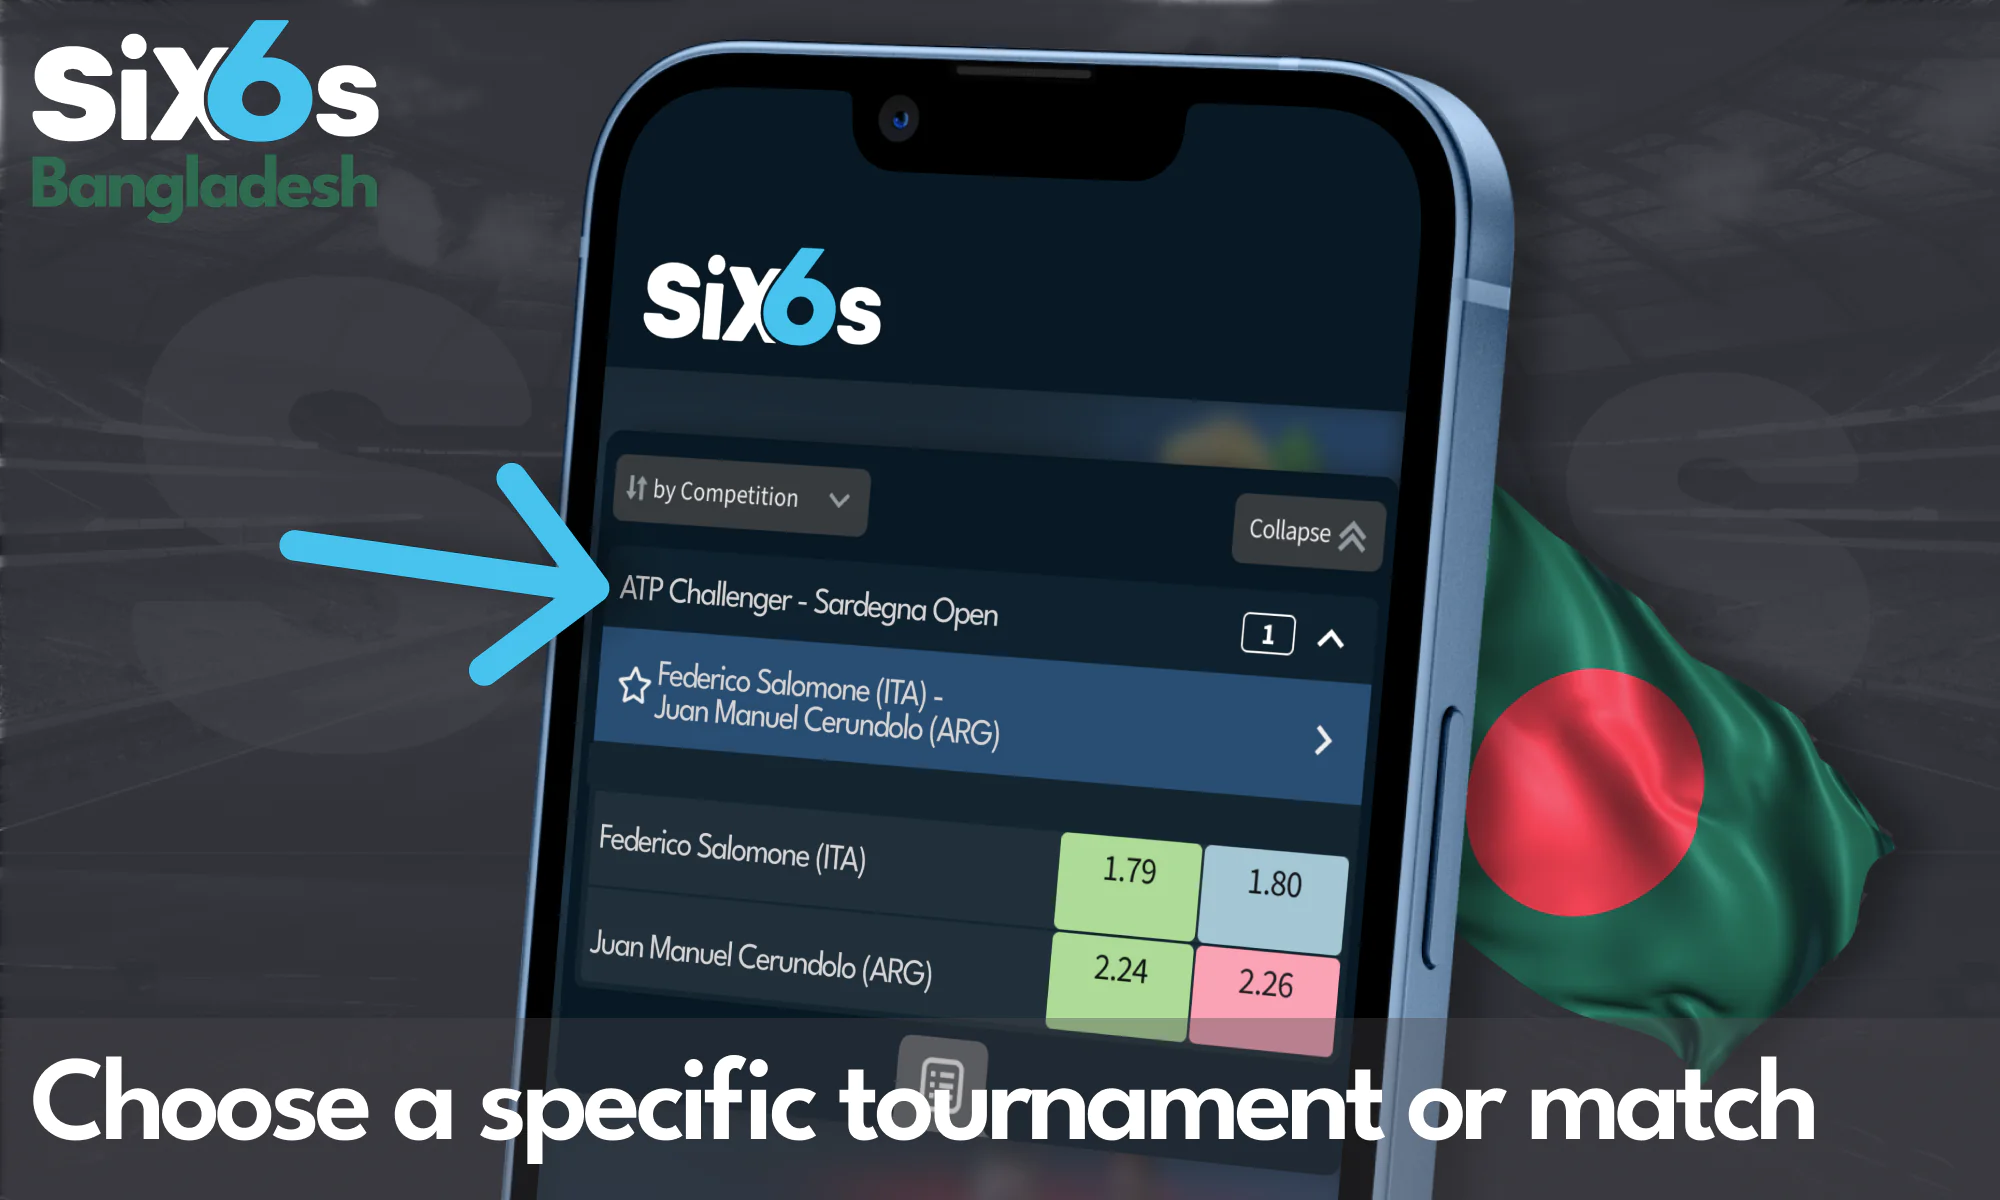 Choose a specific tournament or match to bet at Six6s Bangladesh